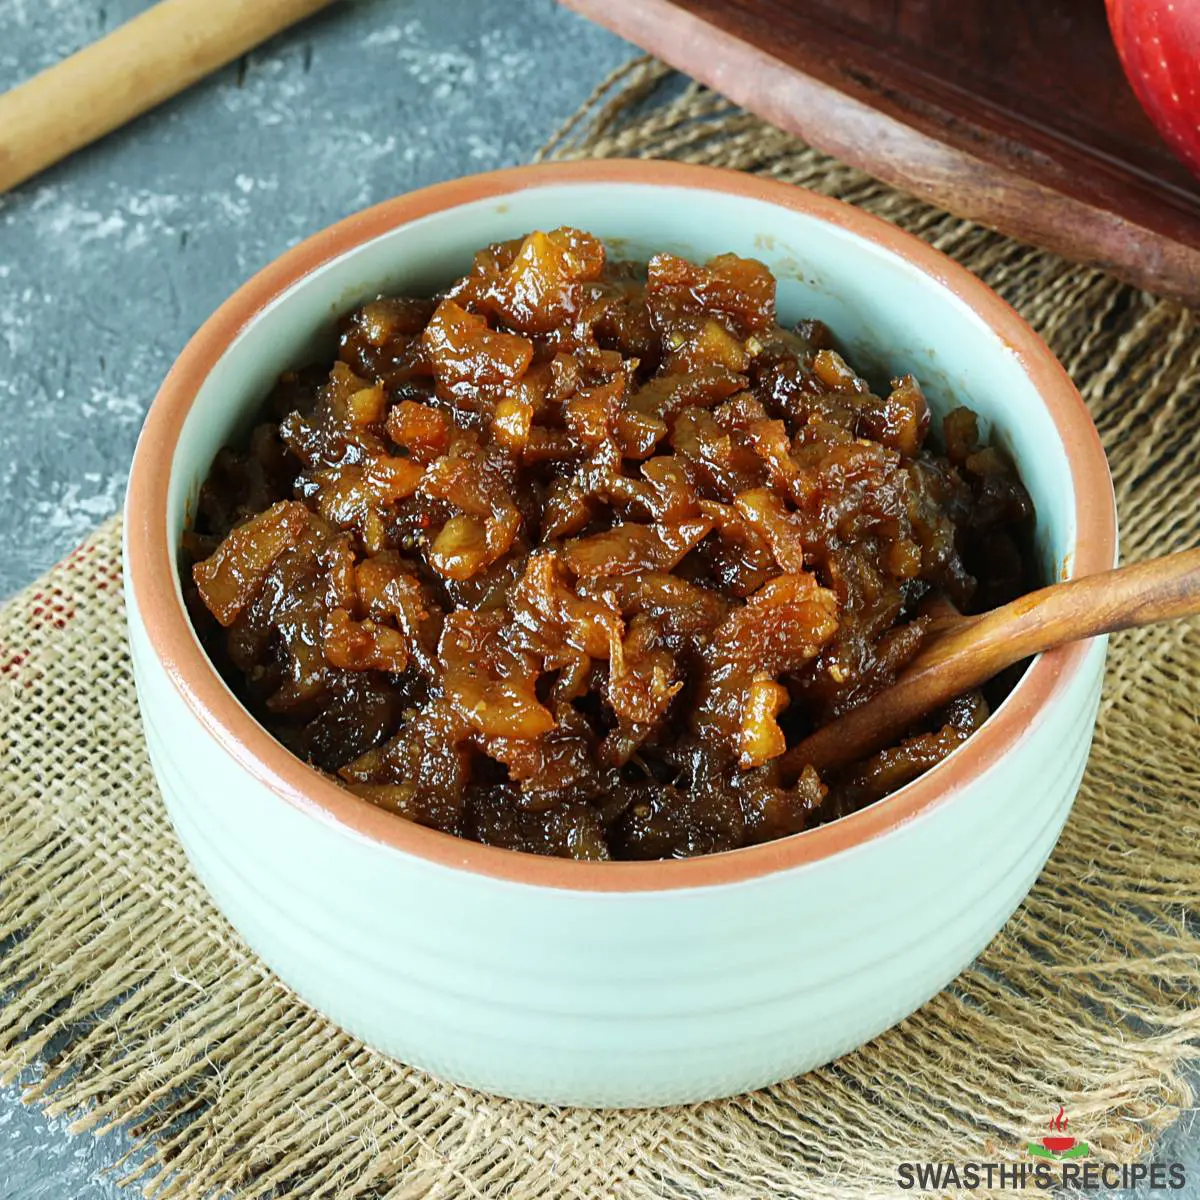 Apple chutney made in Indian style